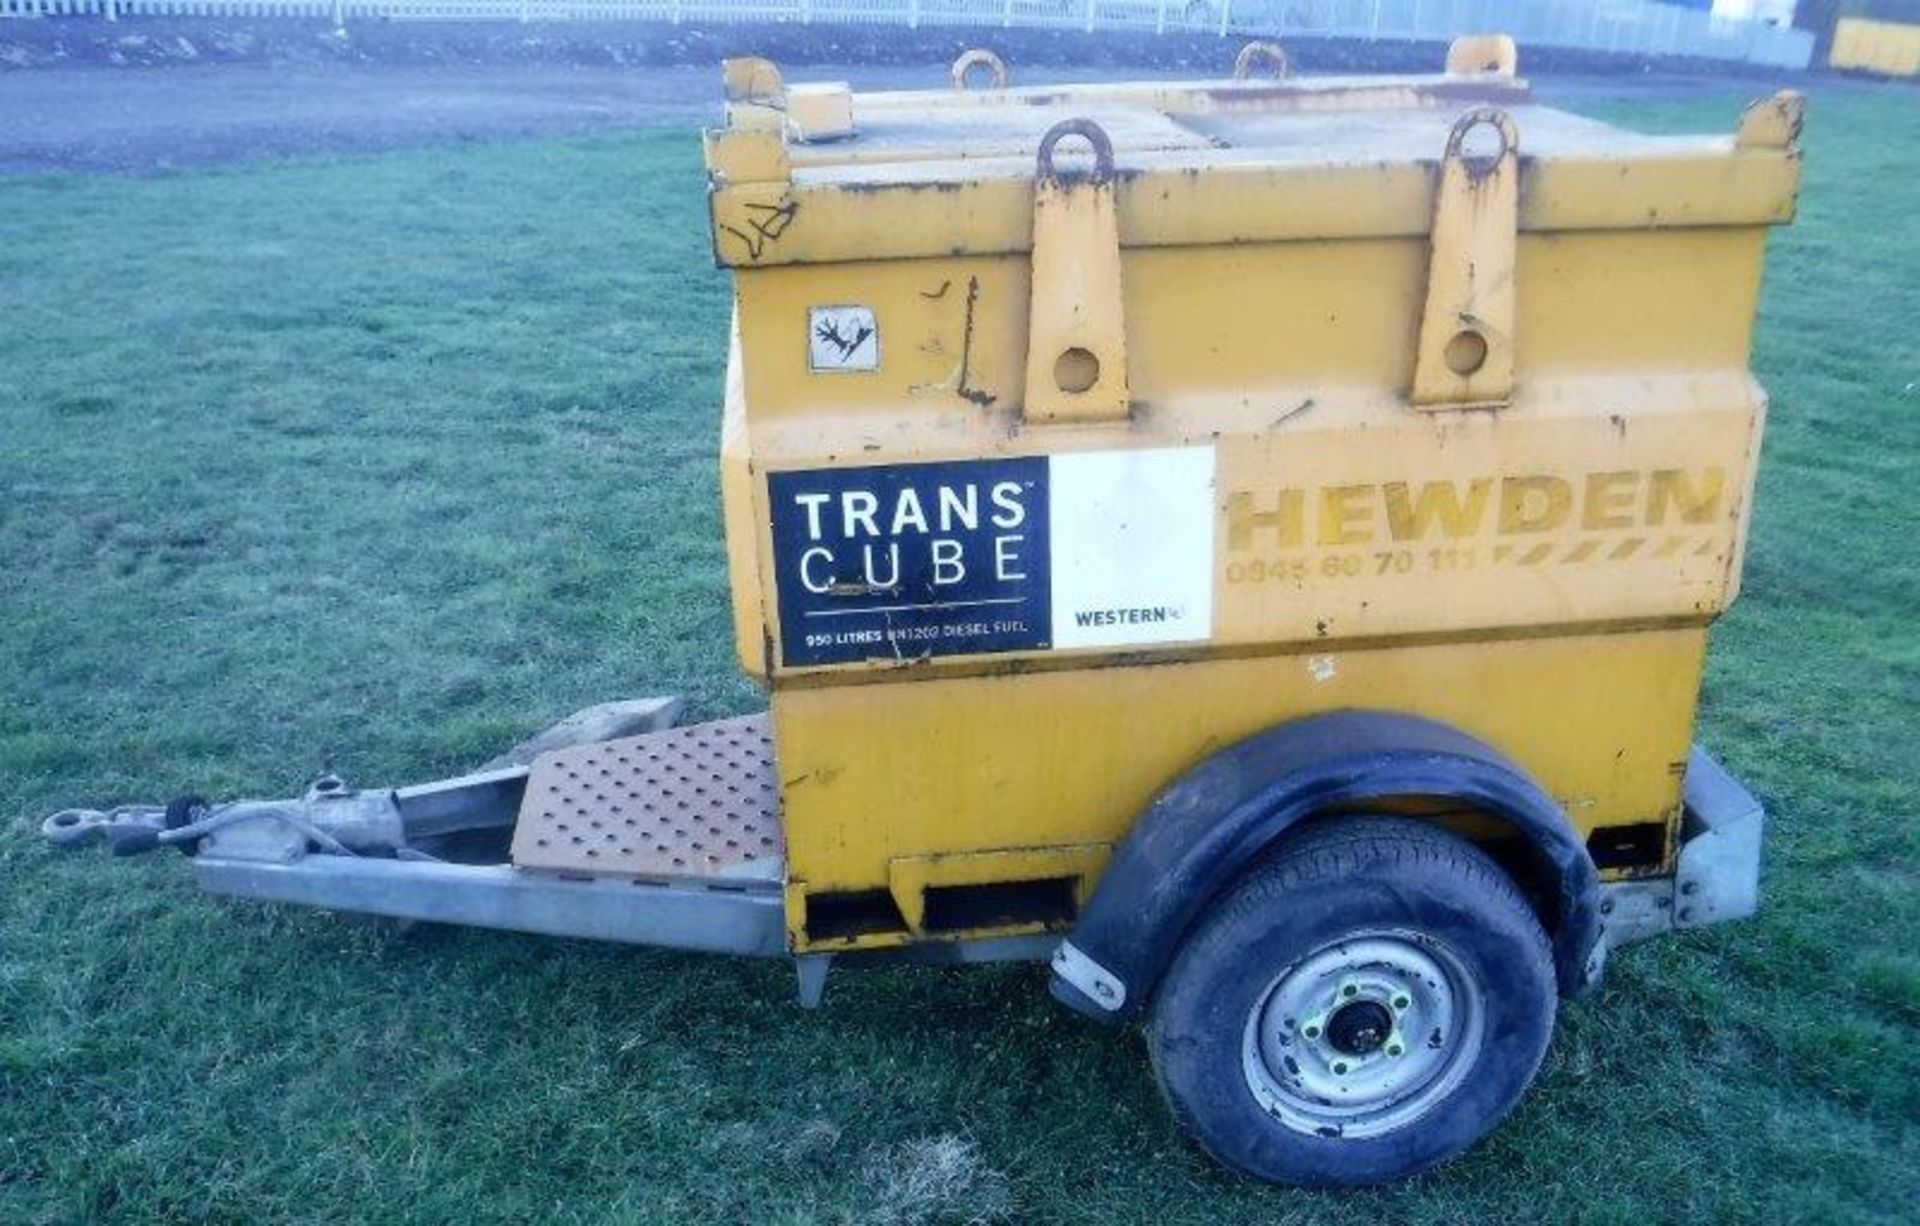 2008 WESTERN fastow 950ltr trans cube fuel bowser S/N 070505413997 (5007607) - Image 2 of 20